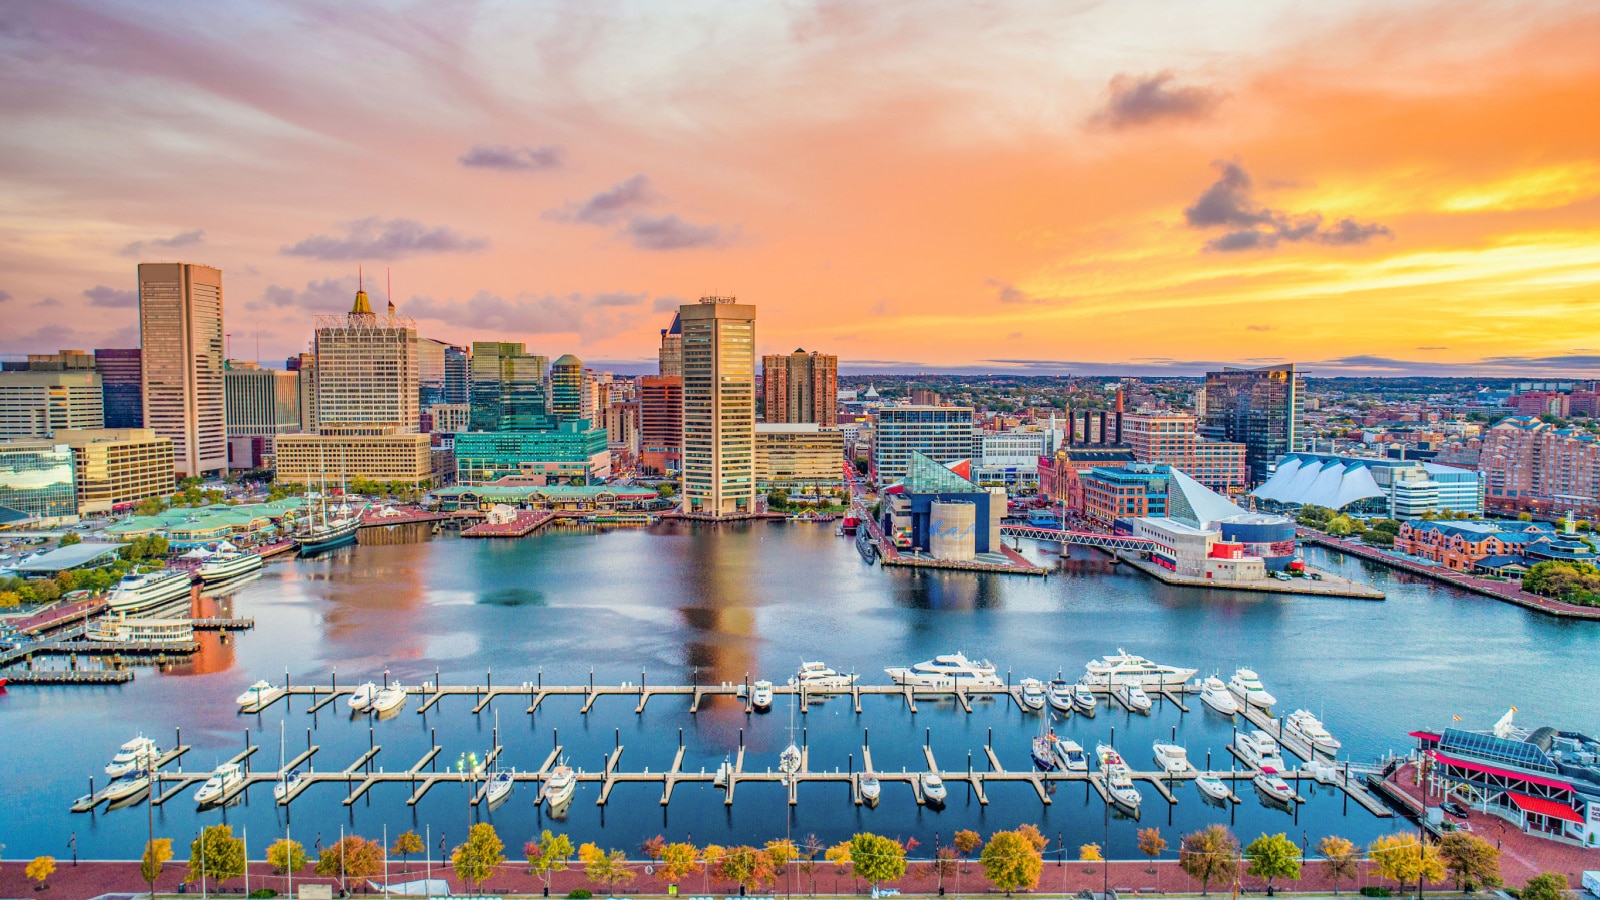 <p>In Baltimore, the Inner Harbor is a must-visit for its mix of history, entertainment, and dining along the waterfront. It’s home to attractions like the National Aquarium.</p>